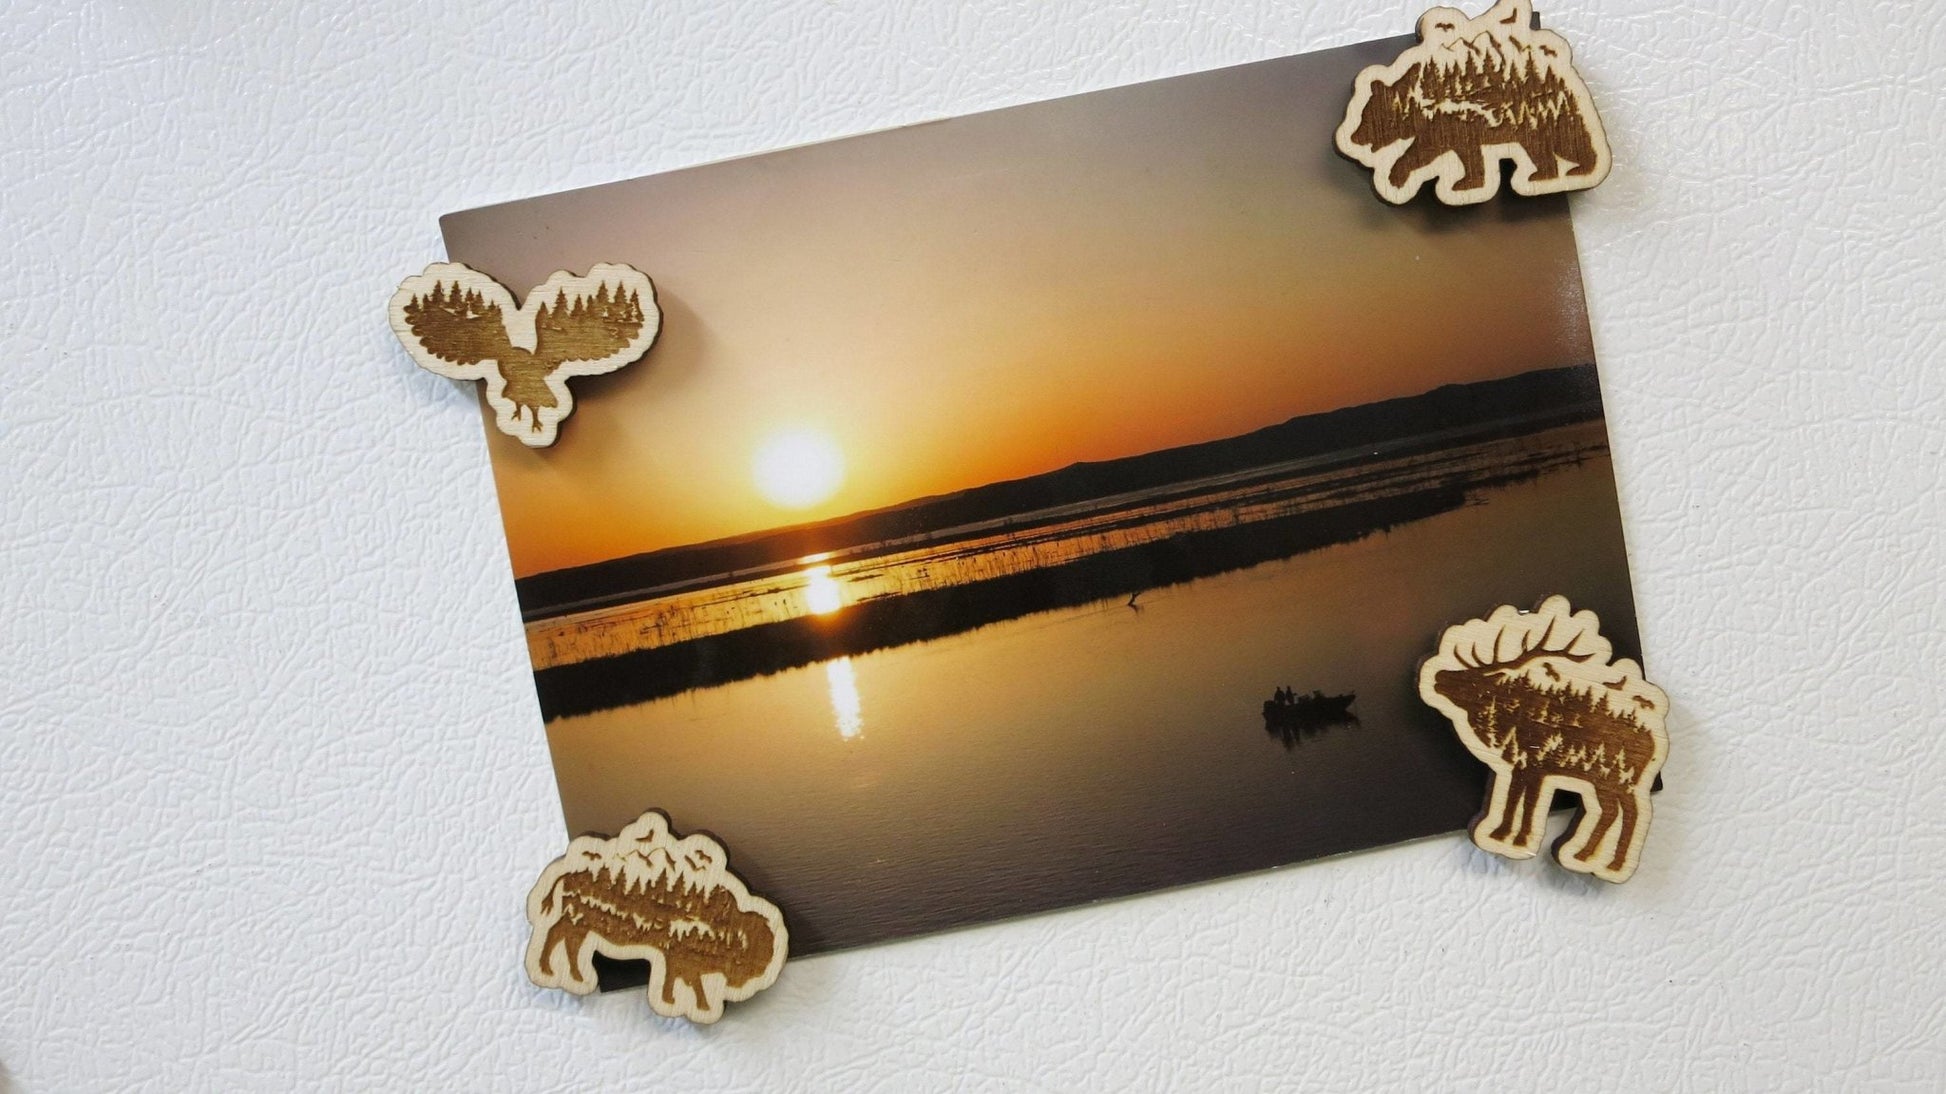 Outdoors Fridge Magnets - Happy's Gifts and Apparel